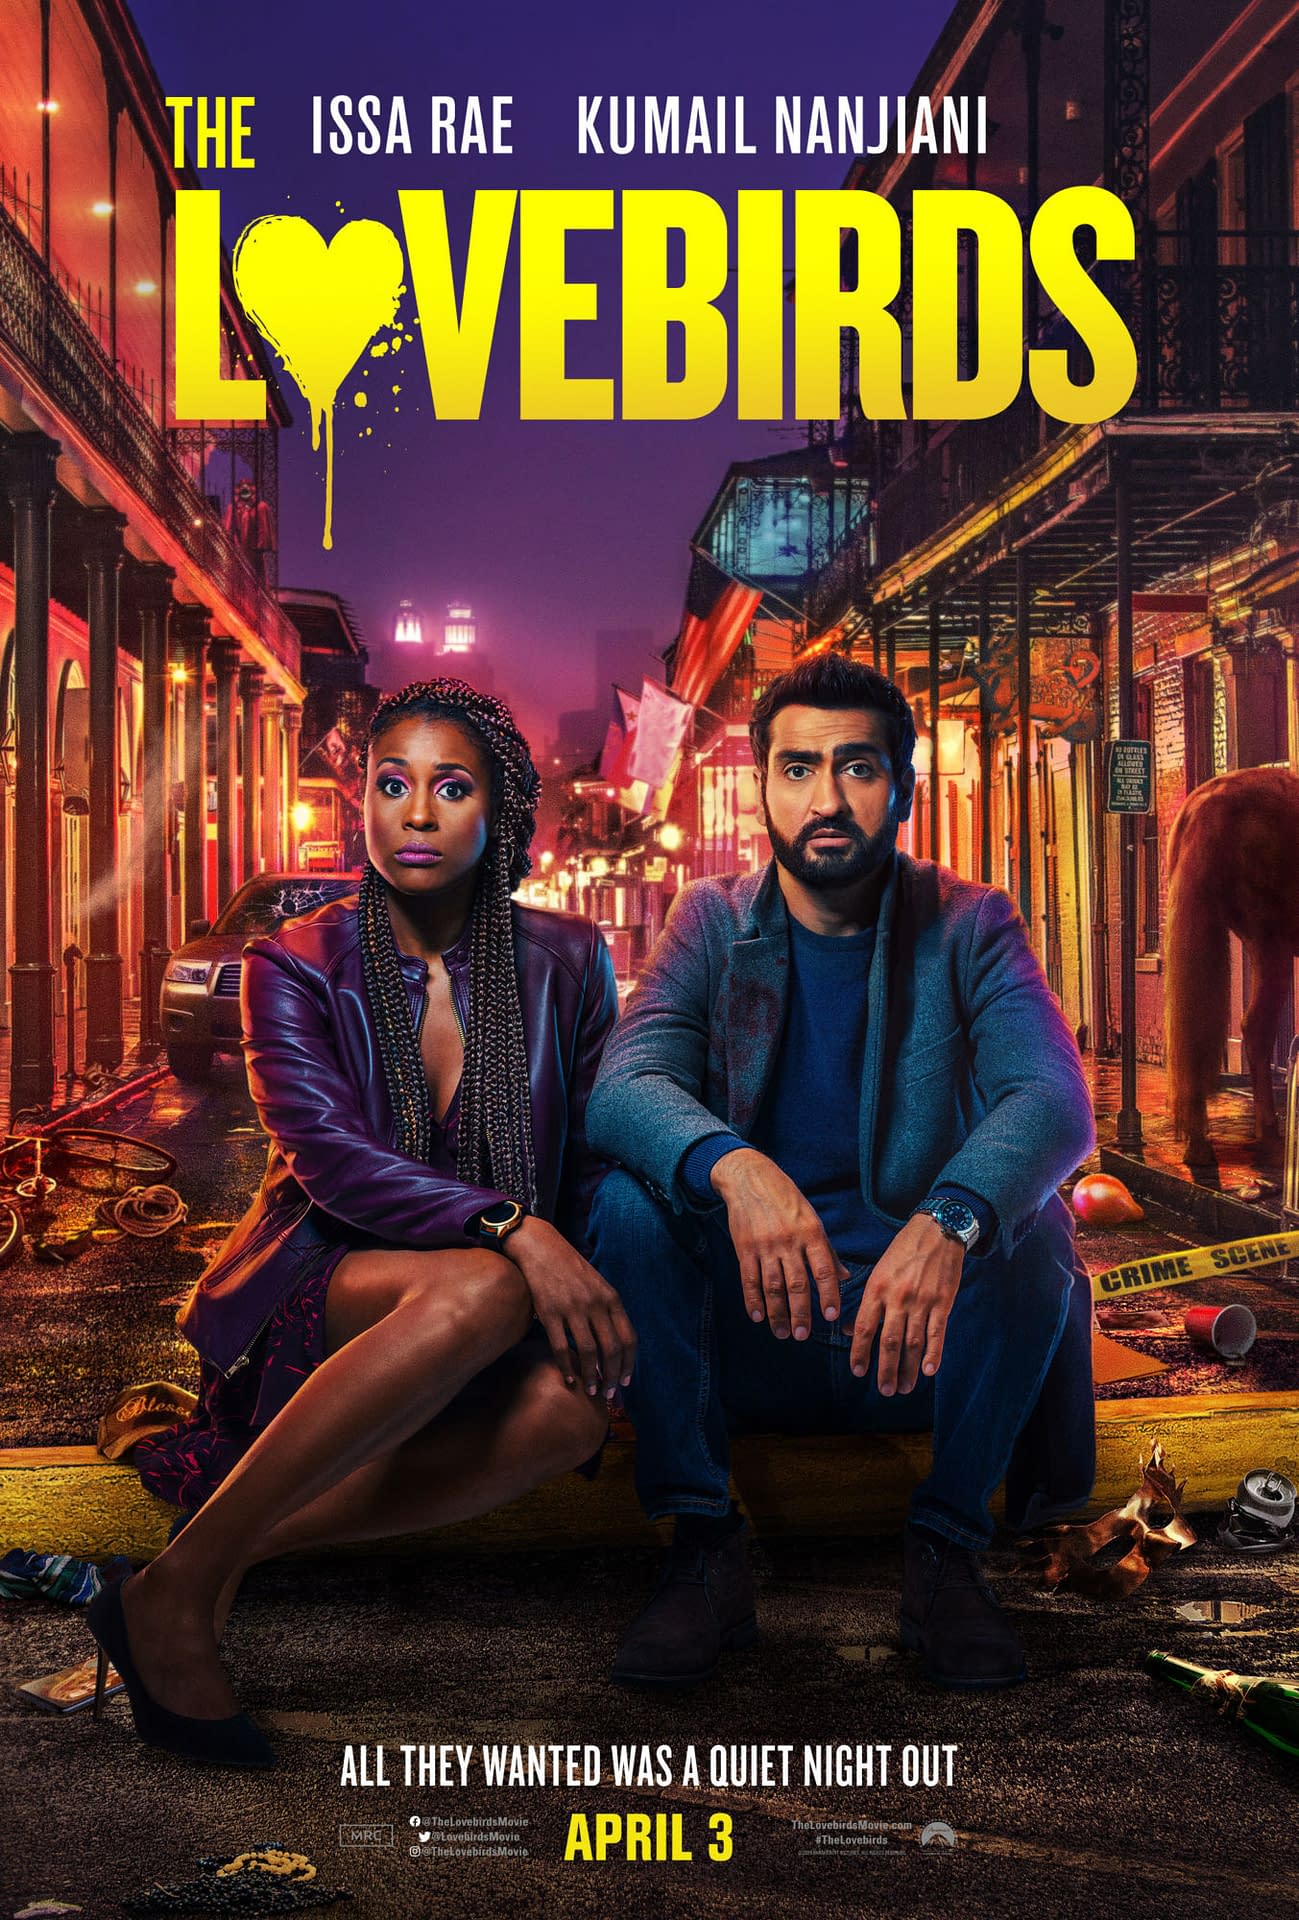 Delayed Comedy "The Lovebirds" Will Stream On Netflix